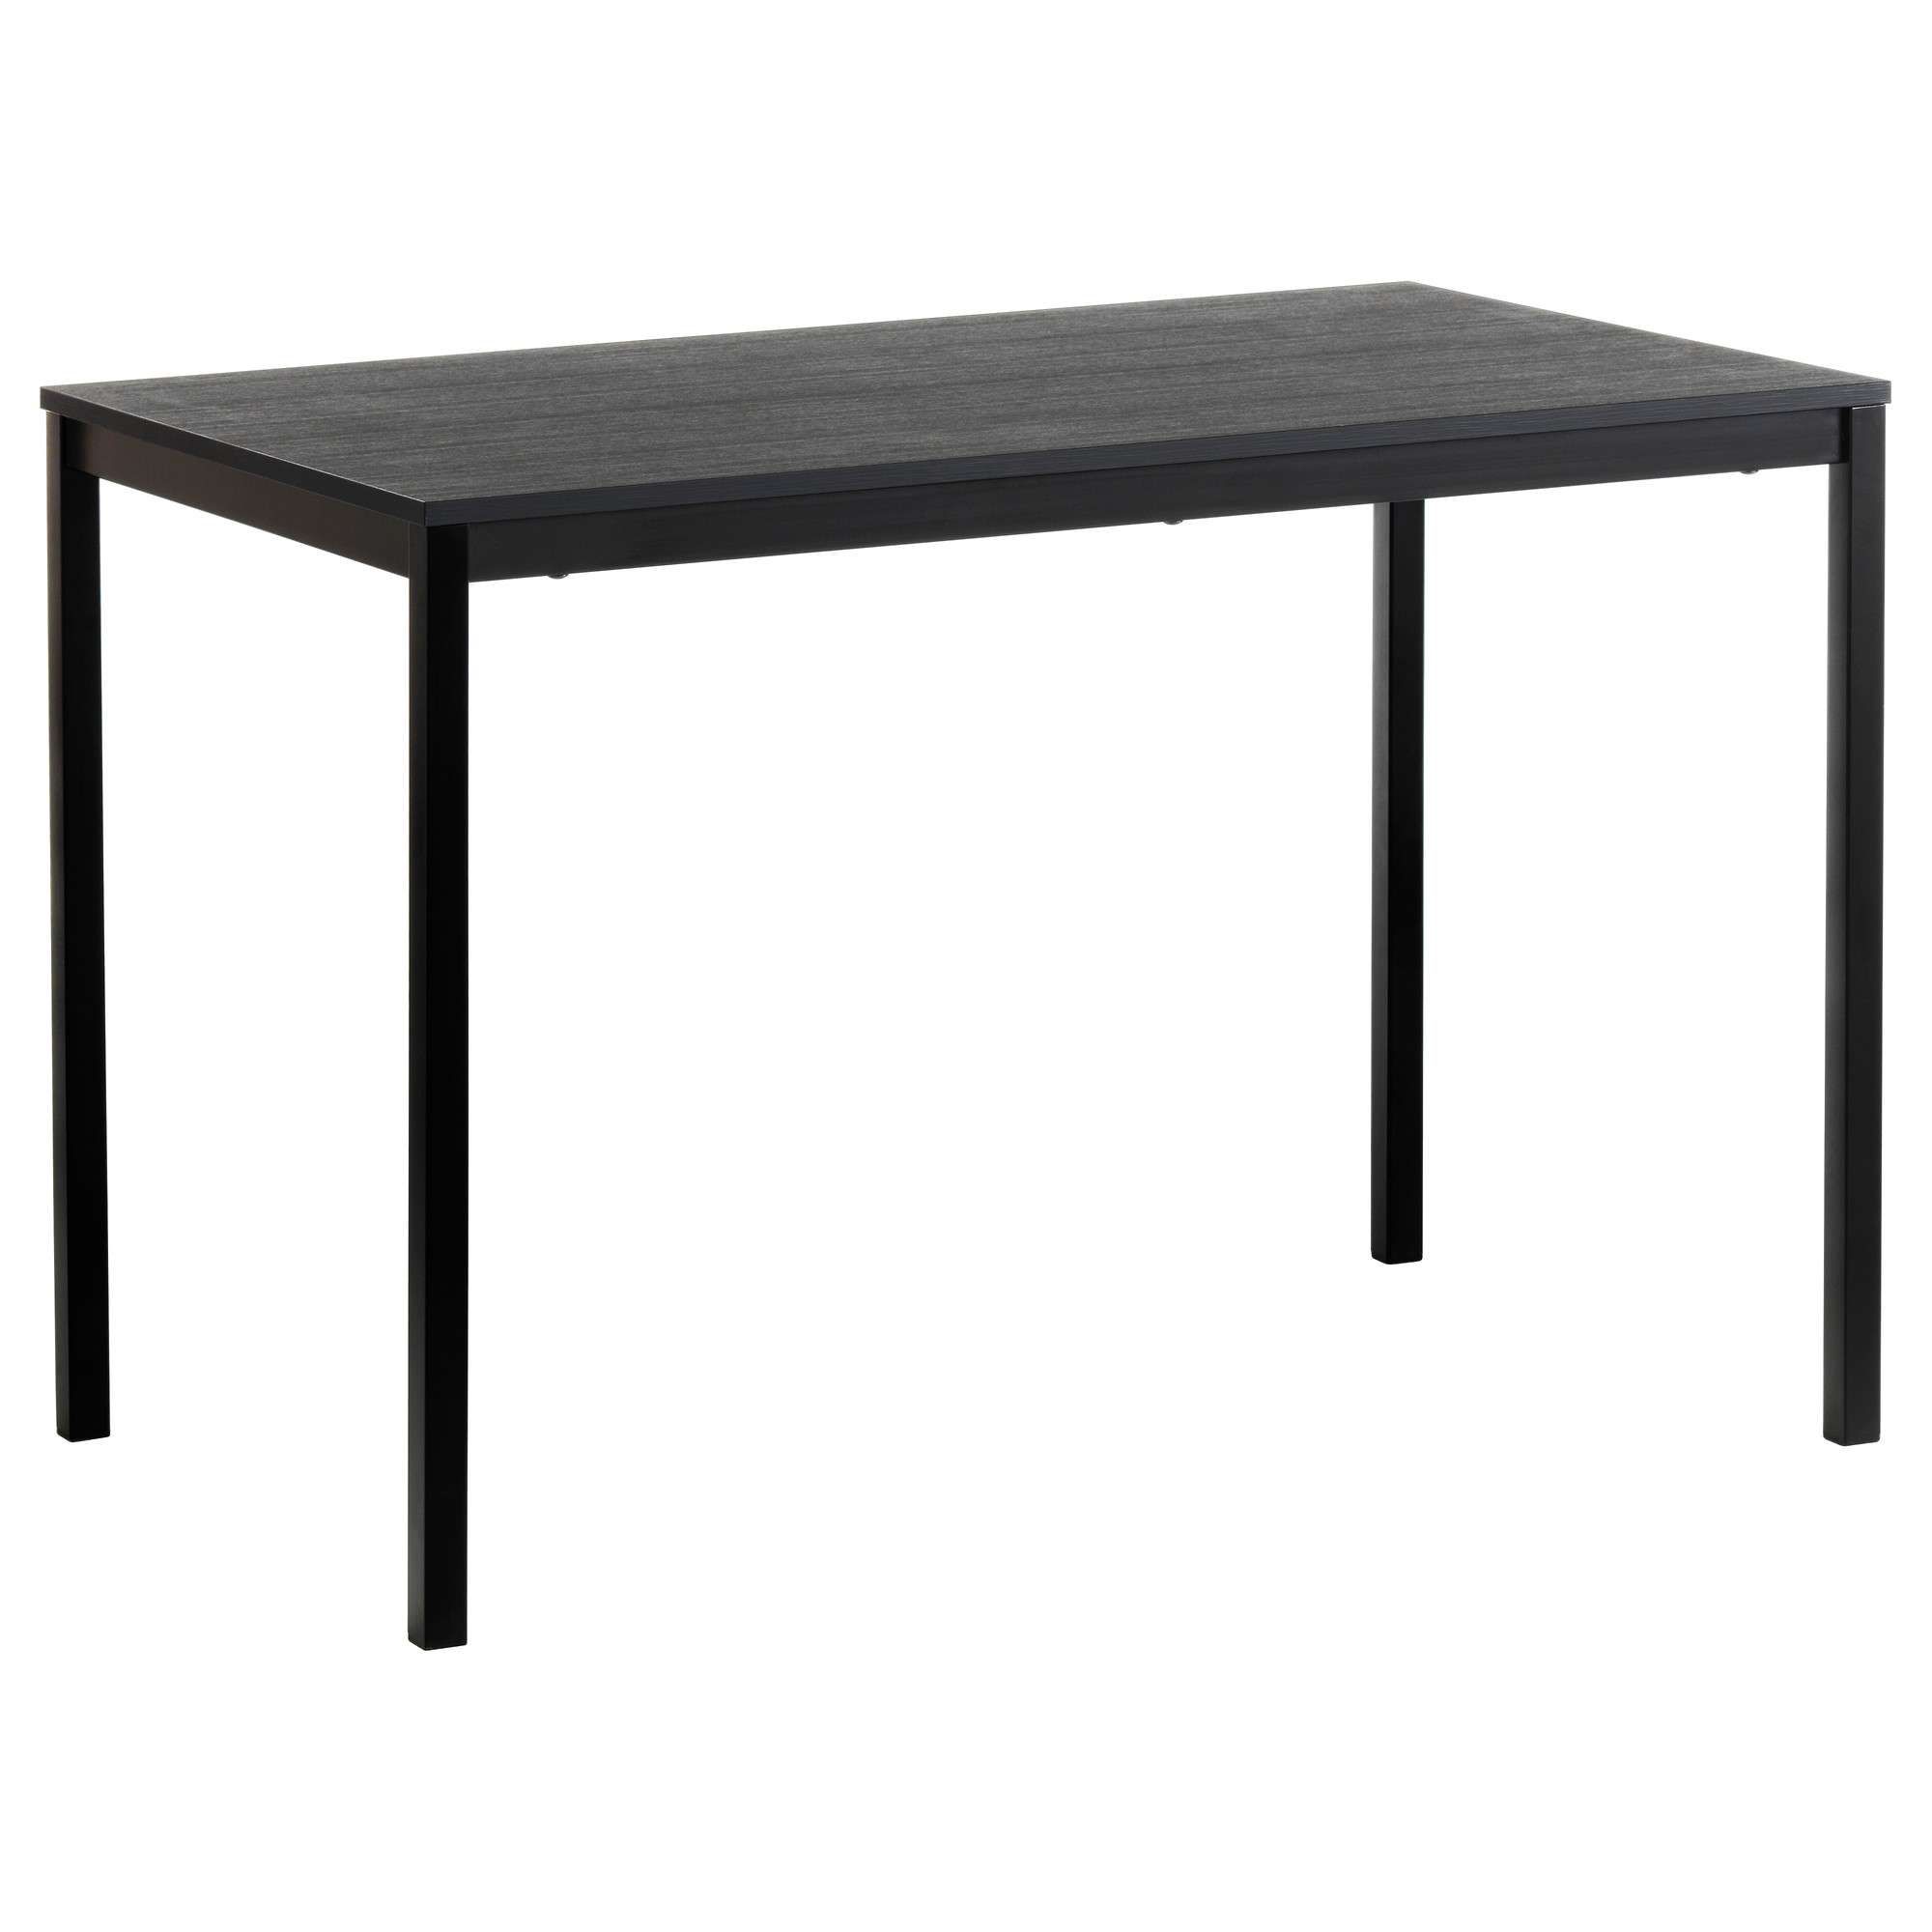 Tärendö Table – Ikea Intended For Favorite Coffee Table Dining Table (View 18 of 20)